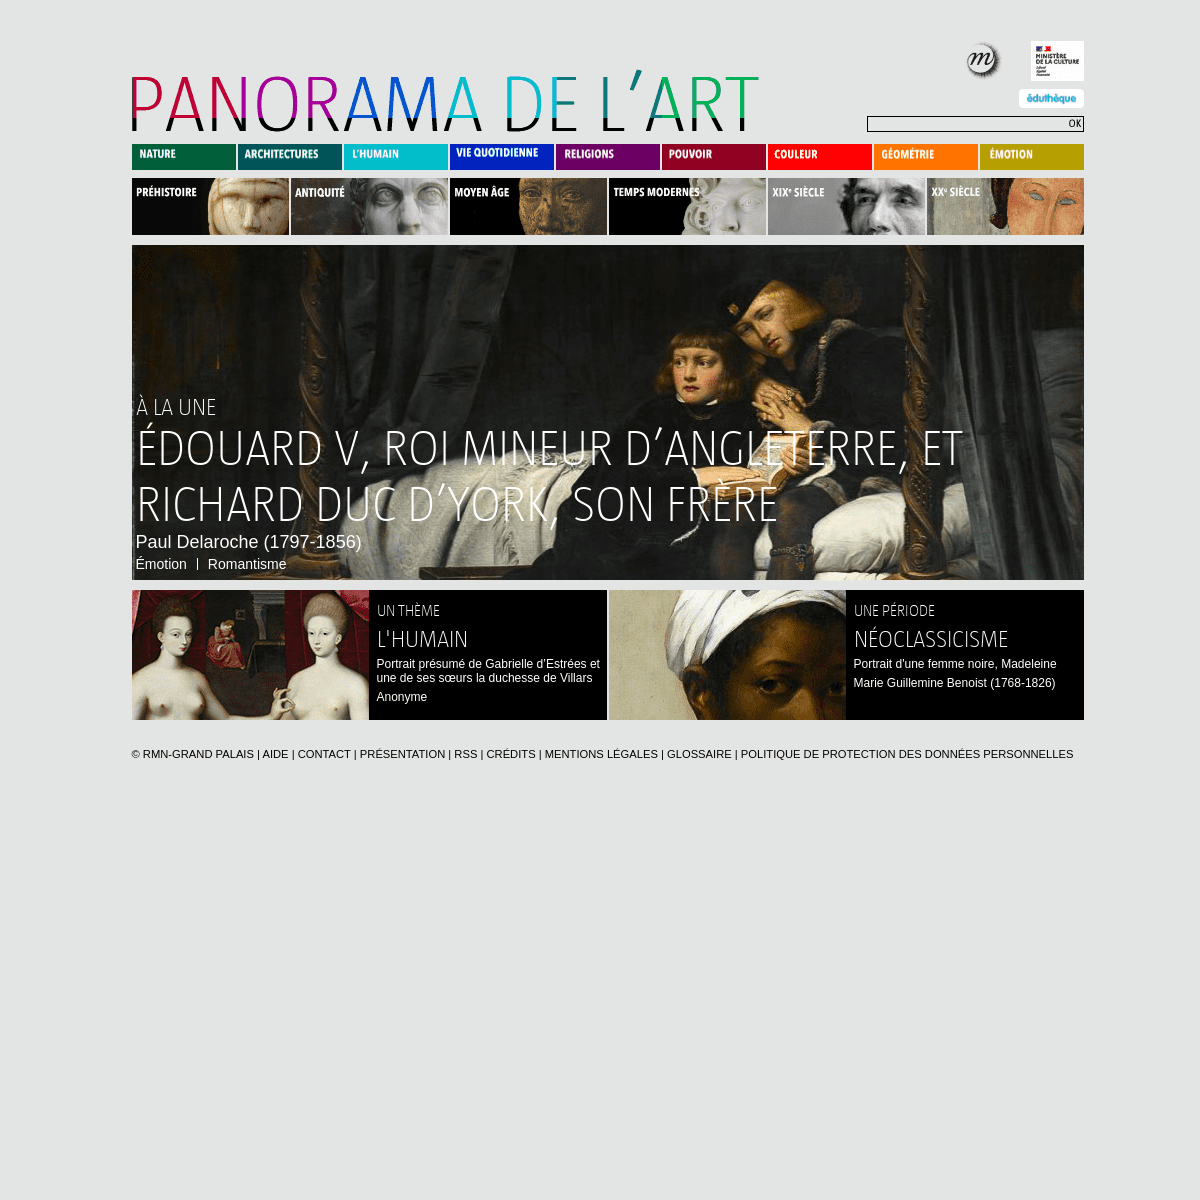 A complete backup of https://panoramadelart.com